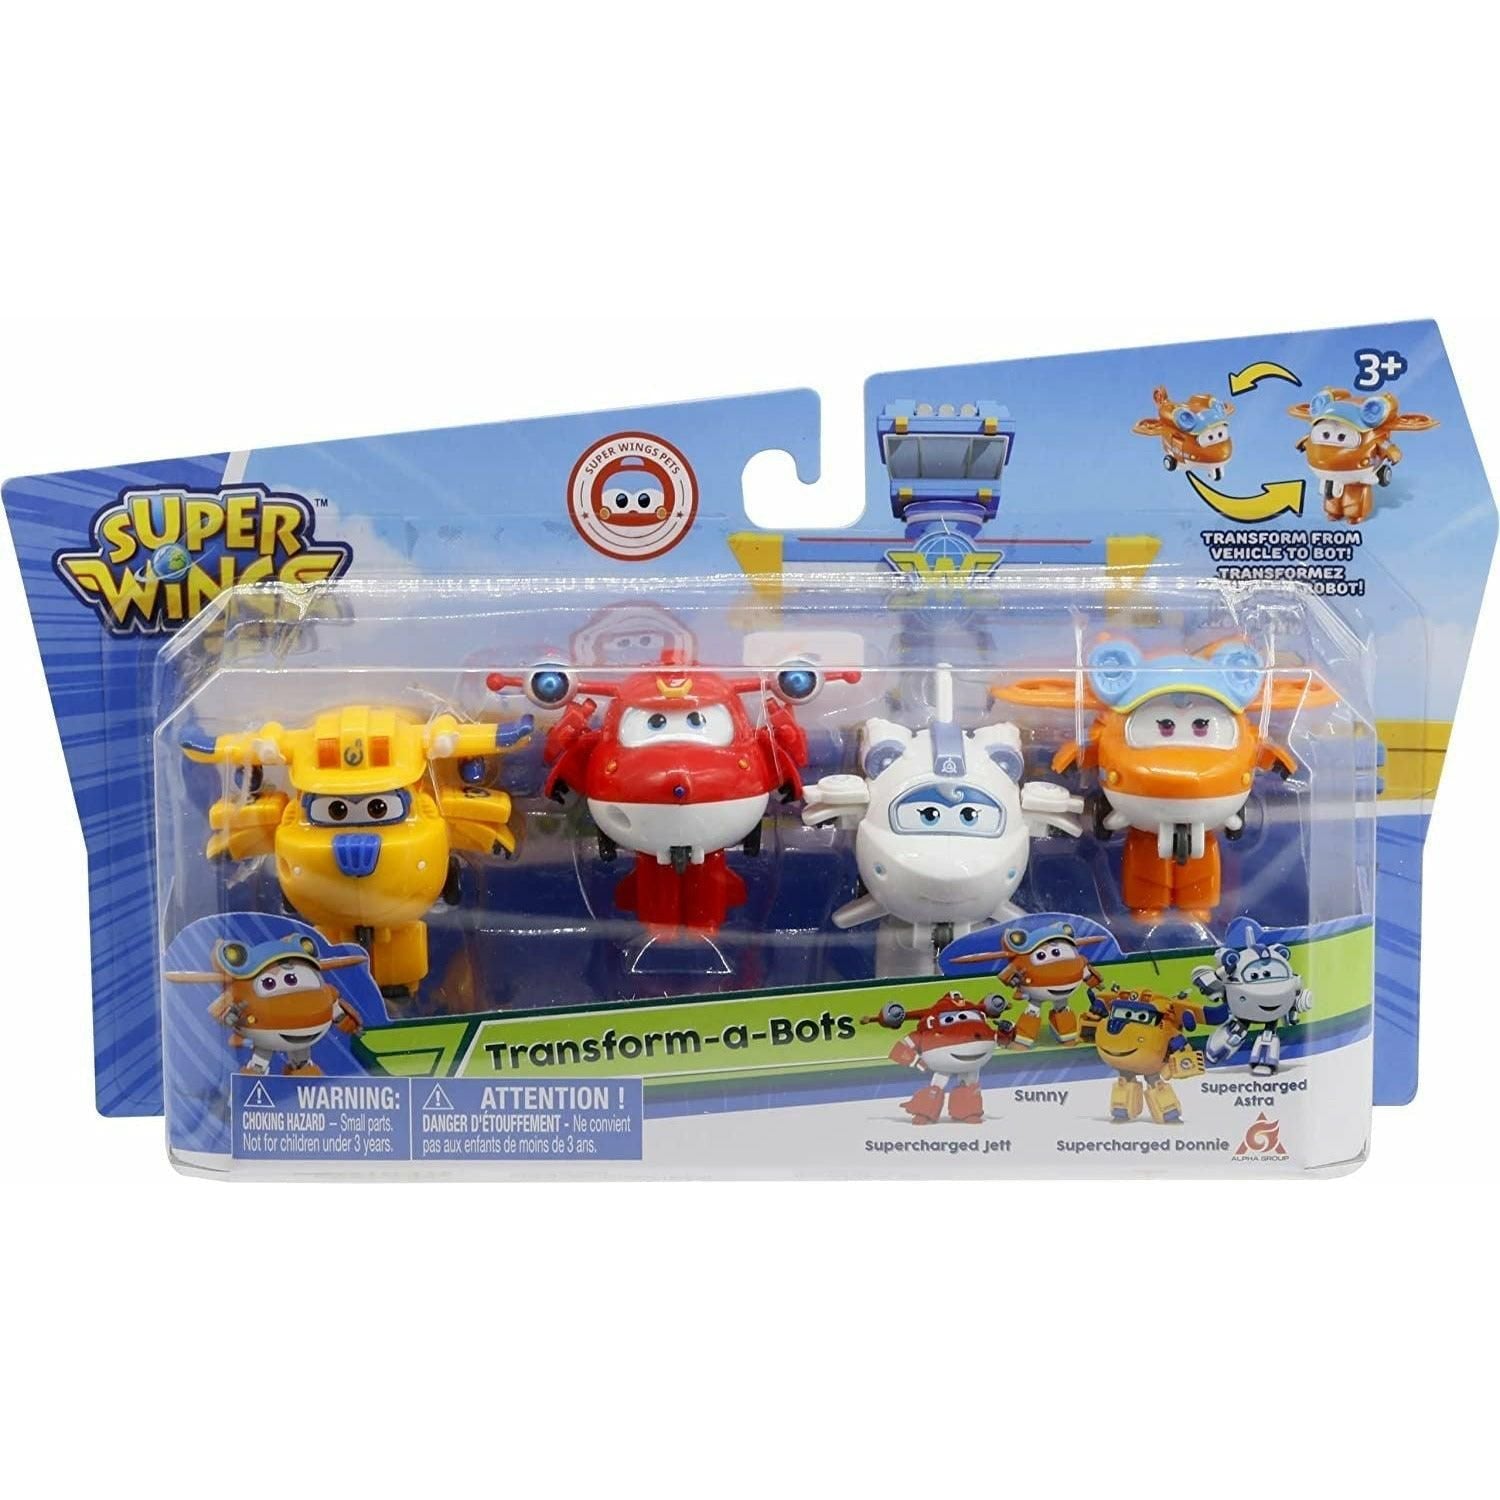 Super Wings 5 Transforming Toys 5-Pack, Supercharged Jett, Supercharged  Paul, Supercharged Dizzy, Golden Boy & Sunny Airplane Toys Action Figures